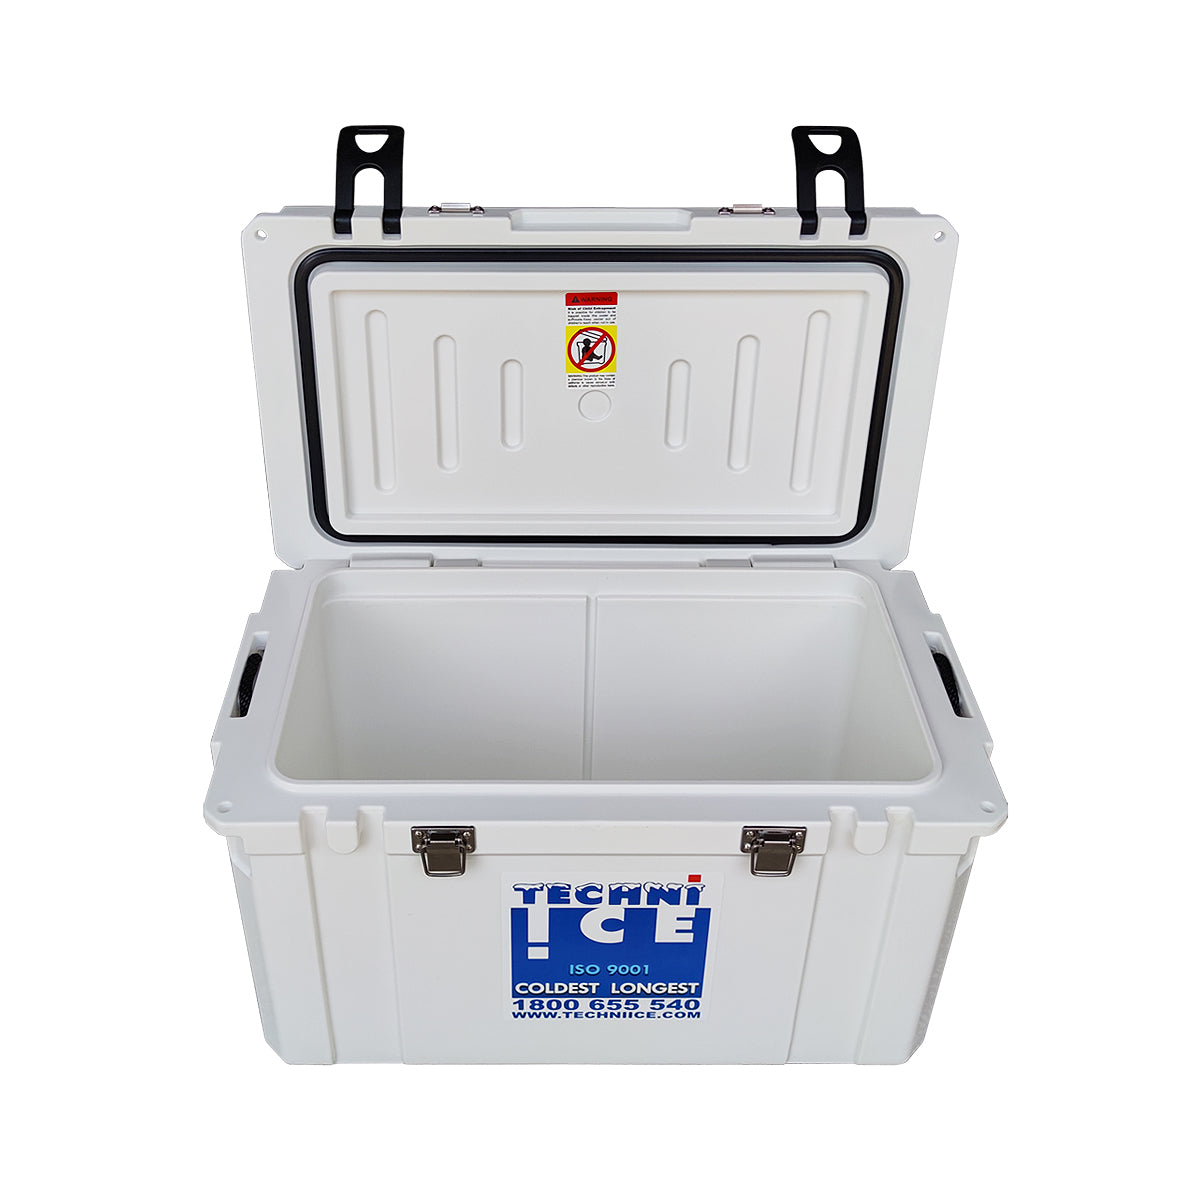 Classic Hardcore Ice Box 55L White *PRE ORDER FOR APRIL DESPATCH *FREE 6 REUSABLE DRY ICE PACKS VALUES $32.95